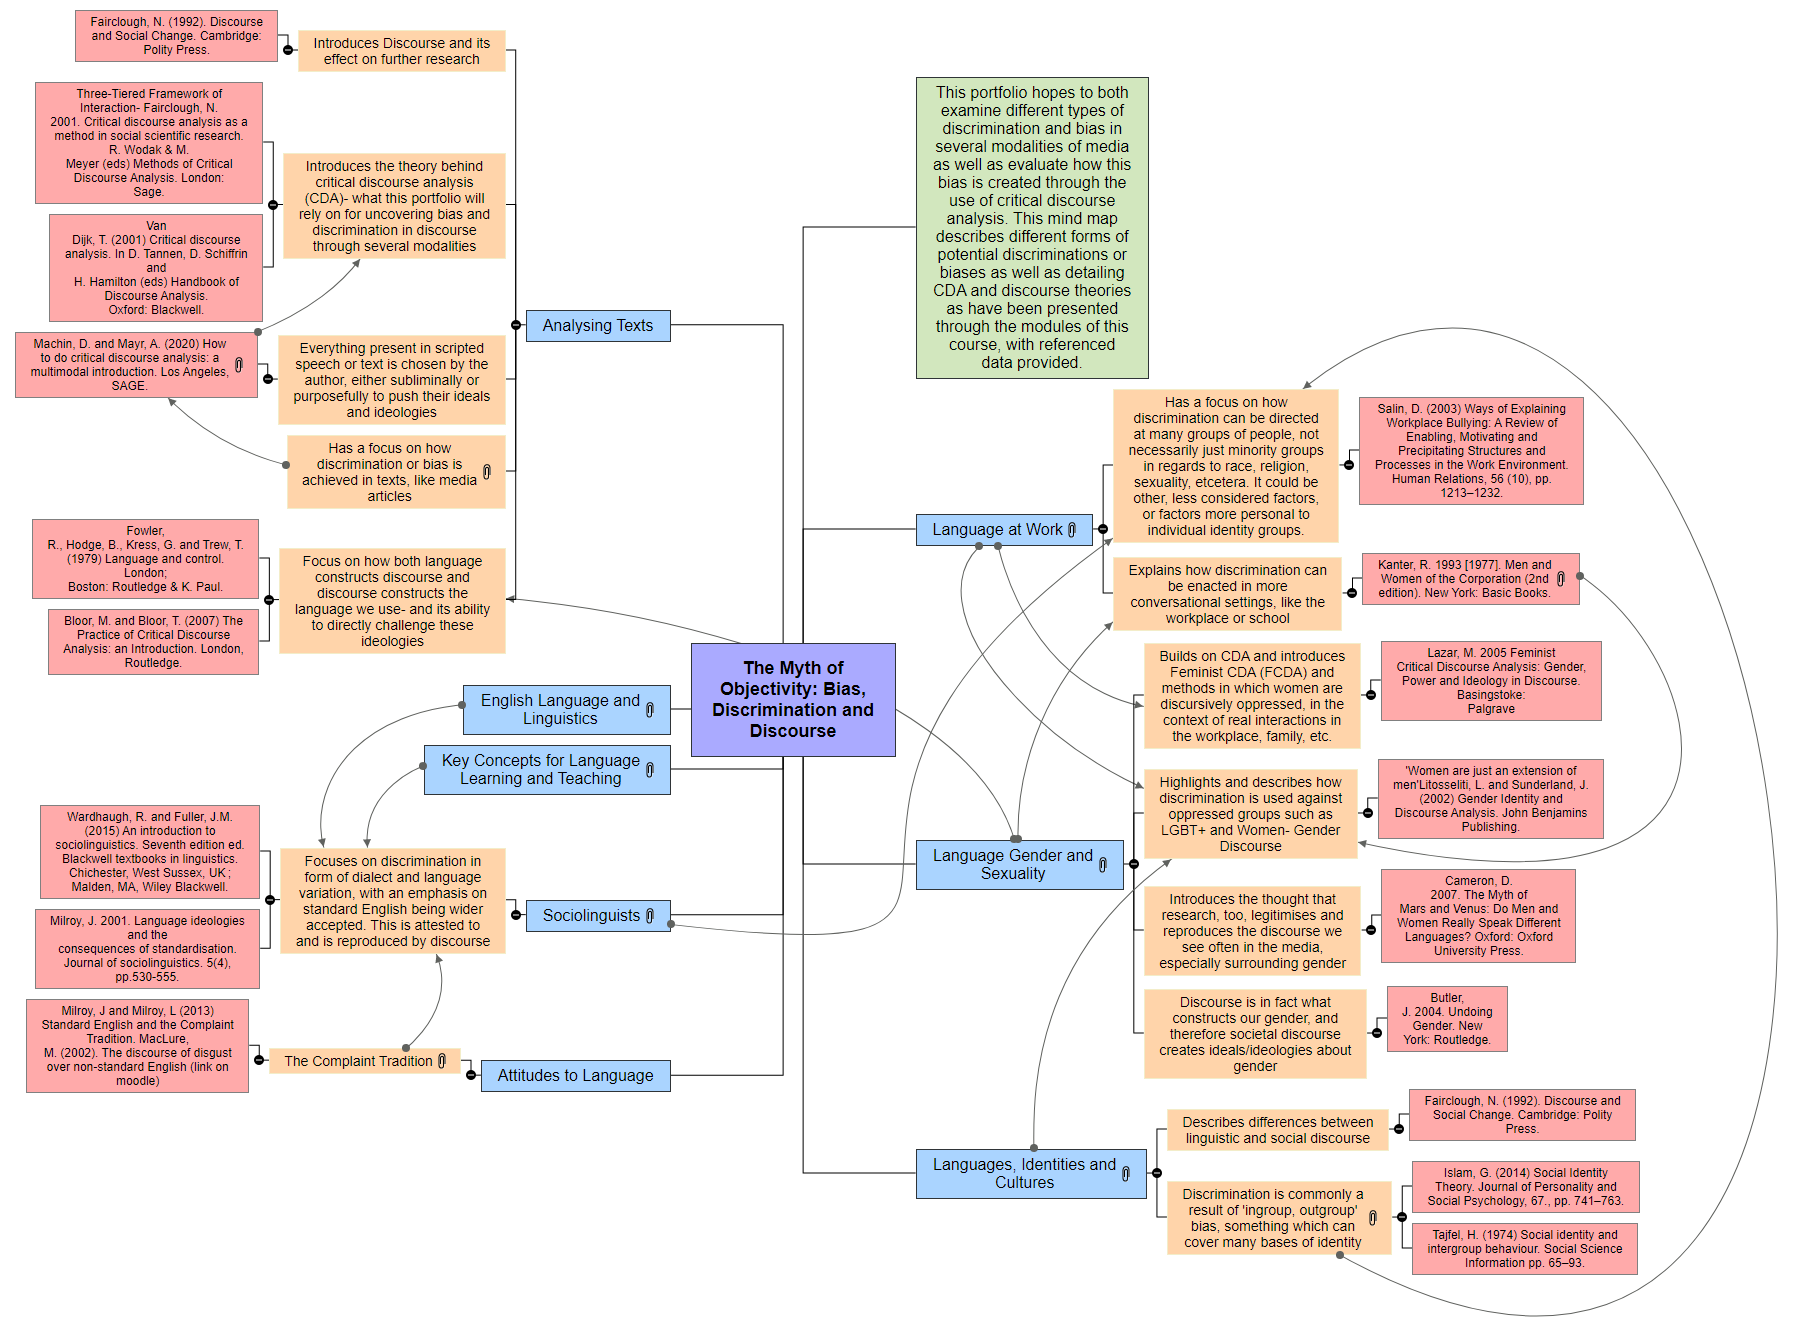 The Myth of Objectivity_ Bias, Discrimination and Discourse Mind Map